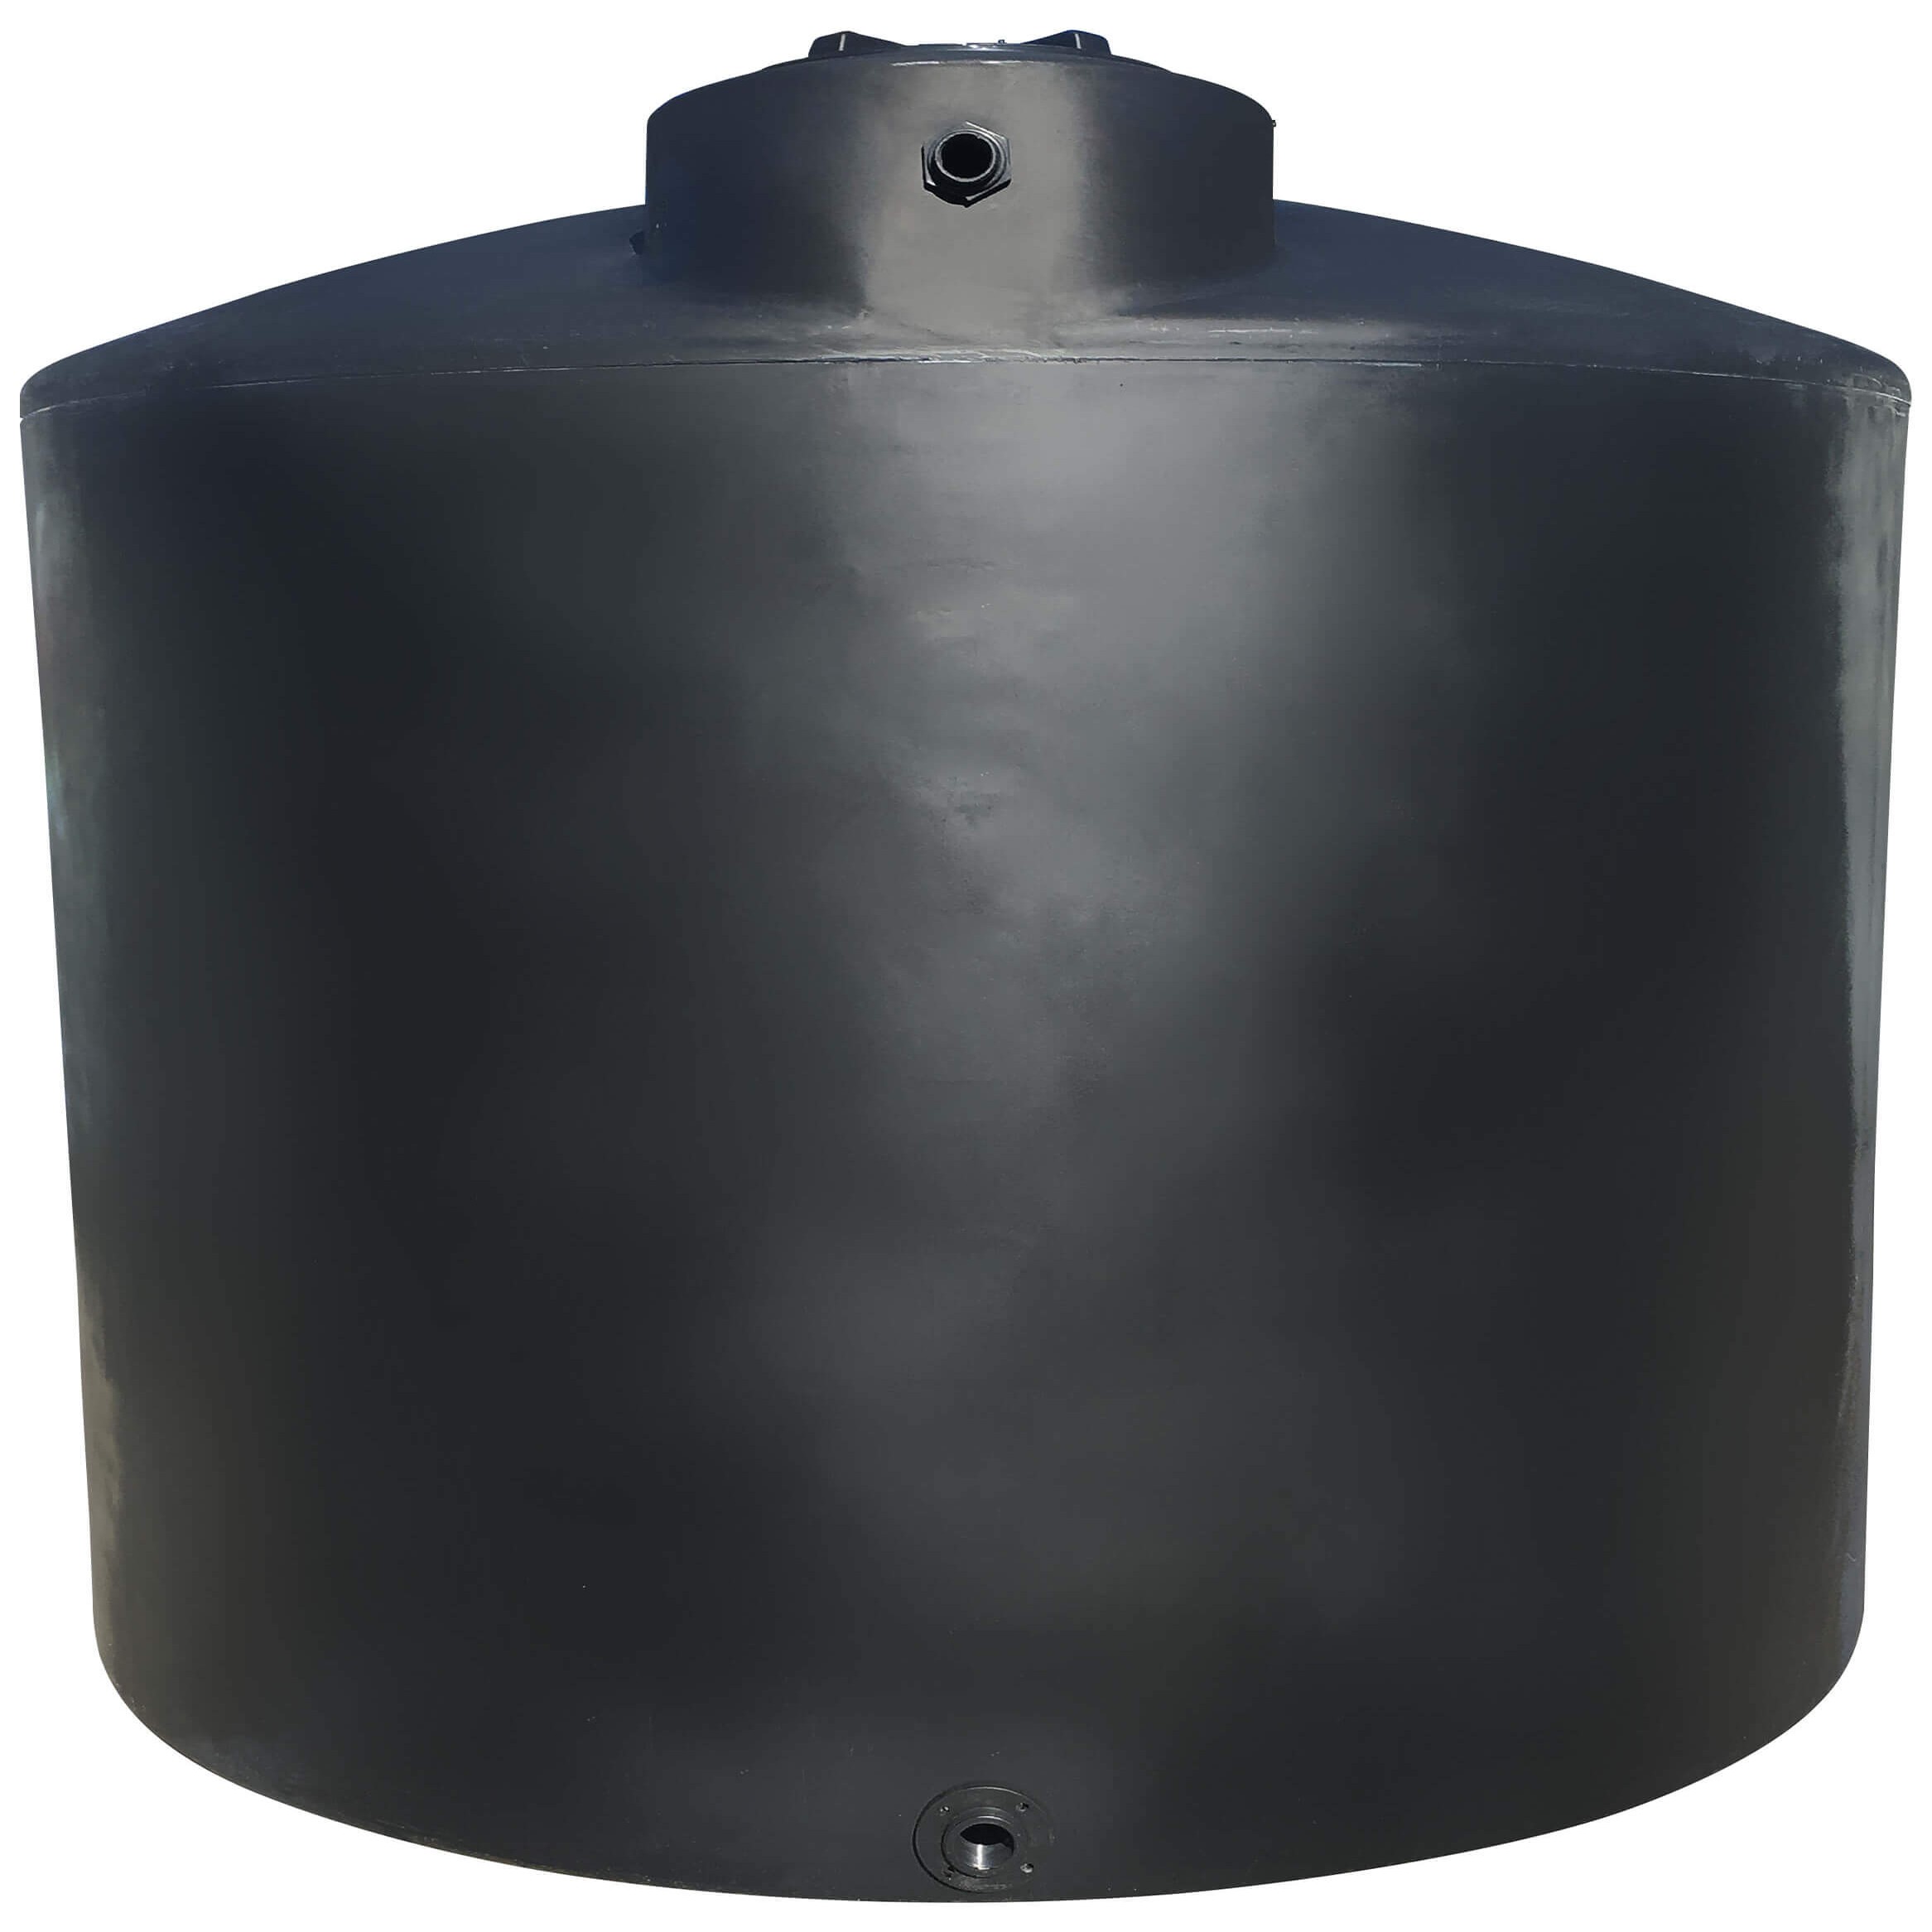 40 Gallon Black Water Waste Holding Tanks MADE IN USA by Class A